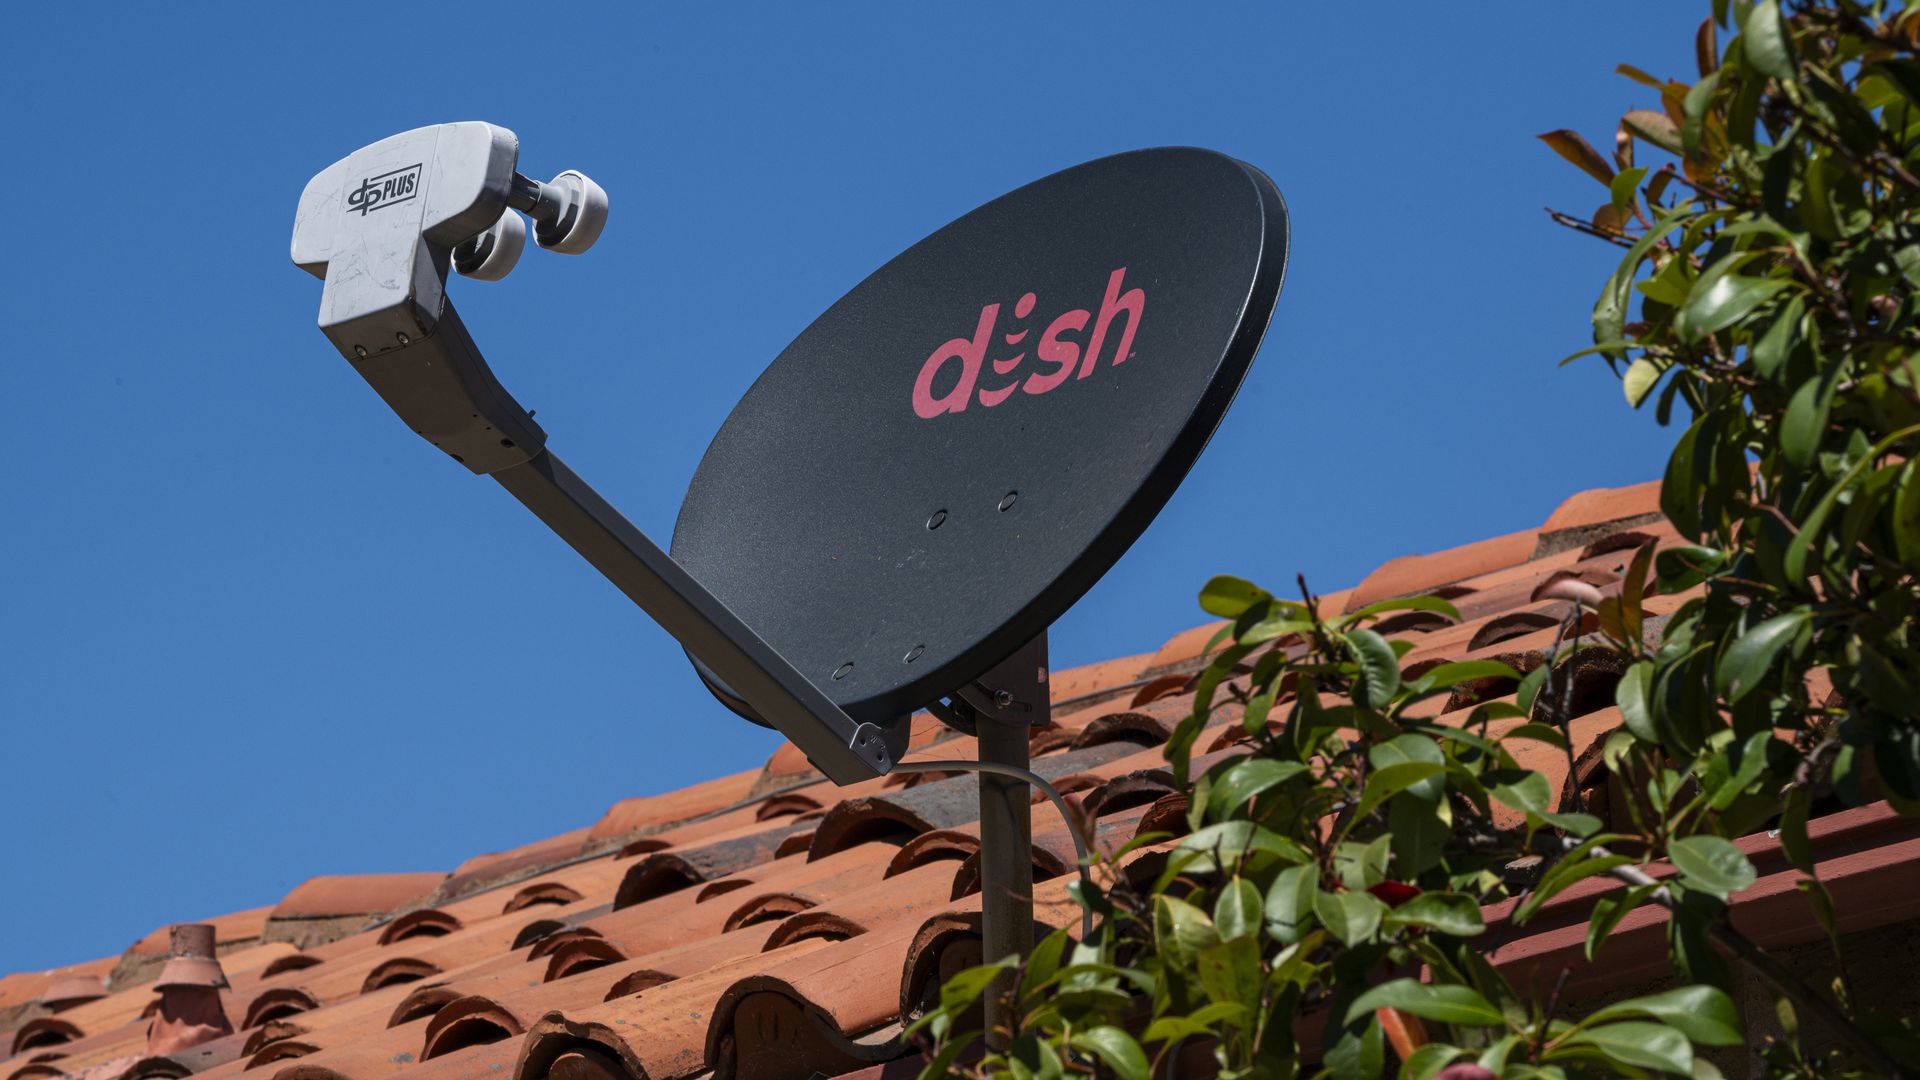 A Dish Network satellite dish on the roof of a home in Crockett, California